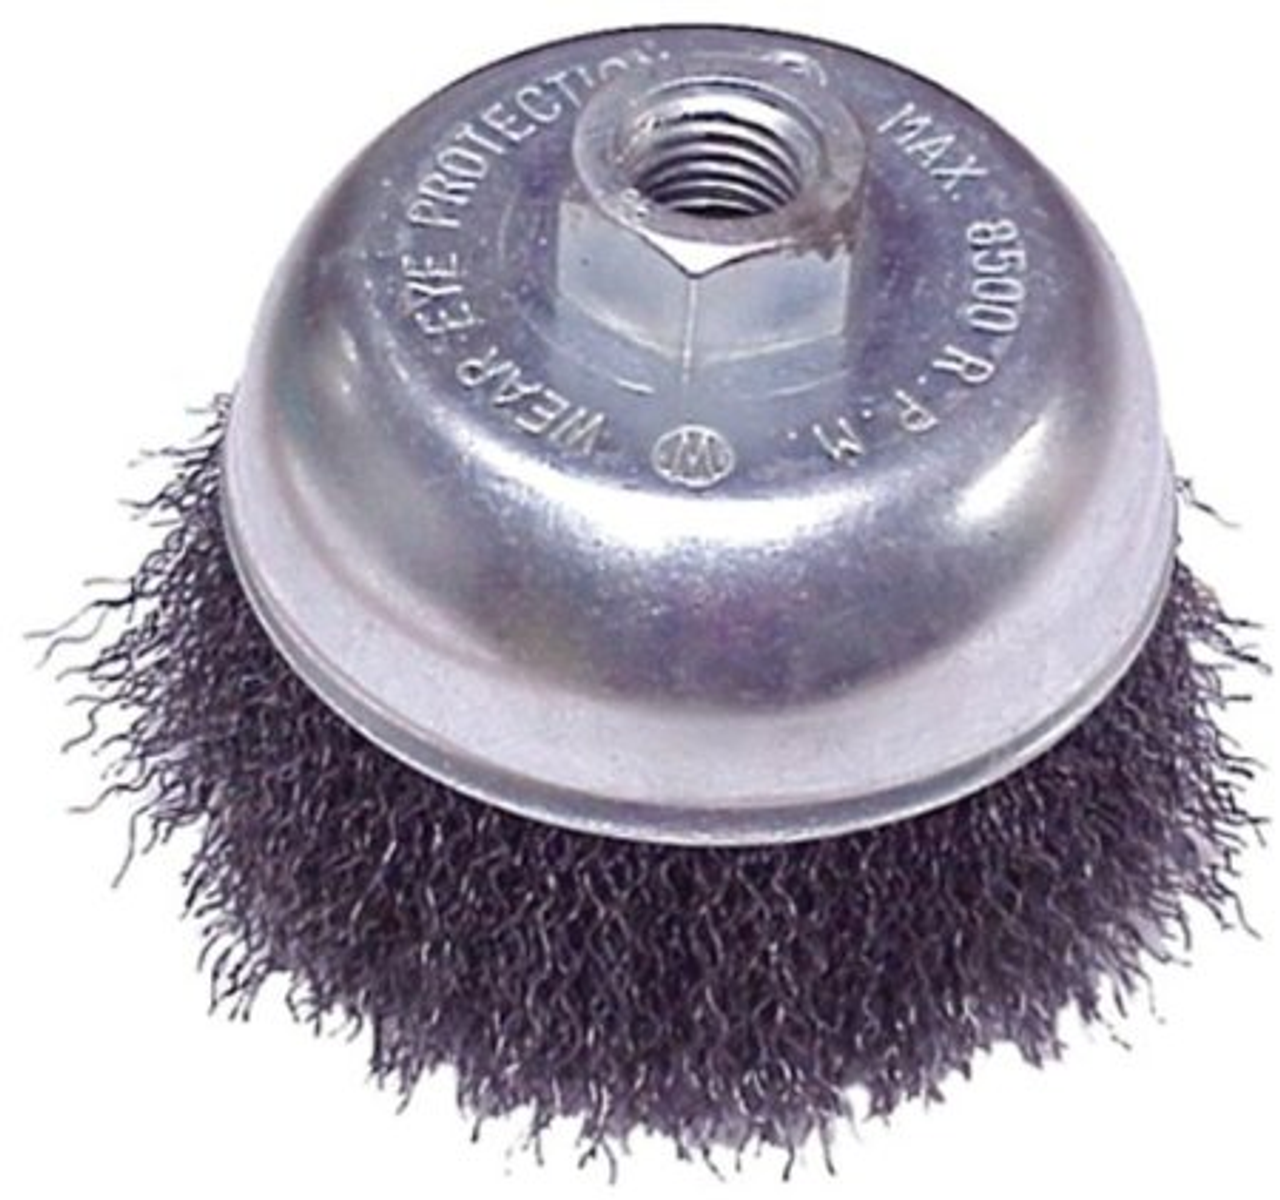 2 in. Wire Cup Brush with 1/4 in. Shank